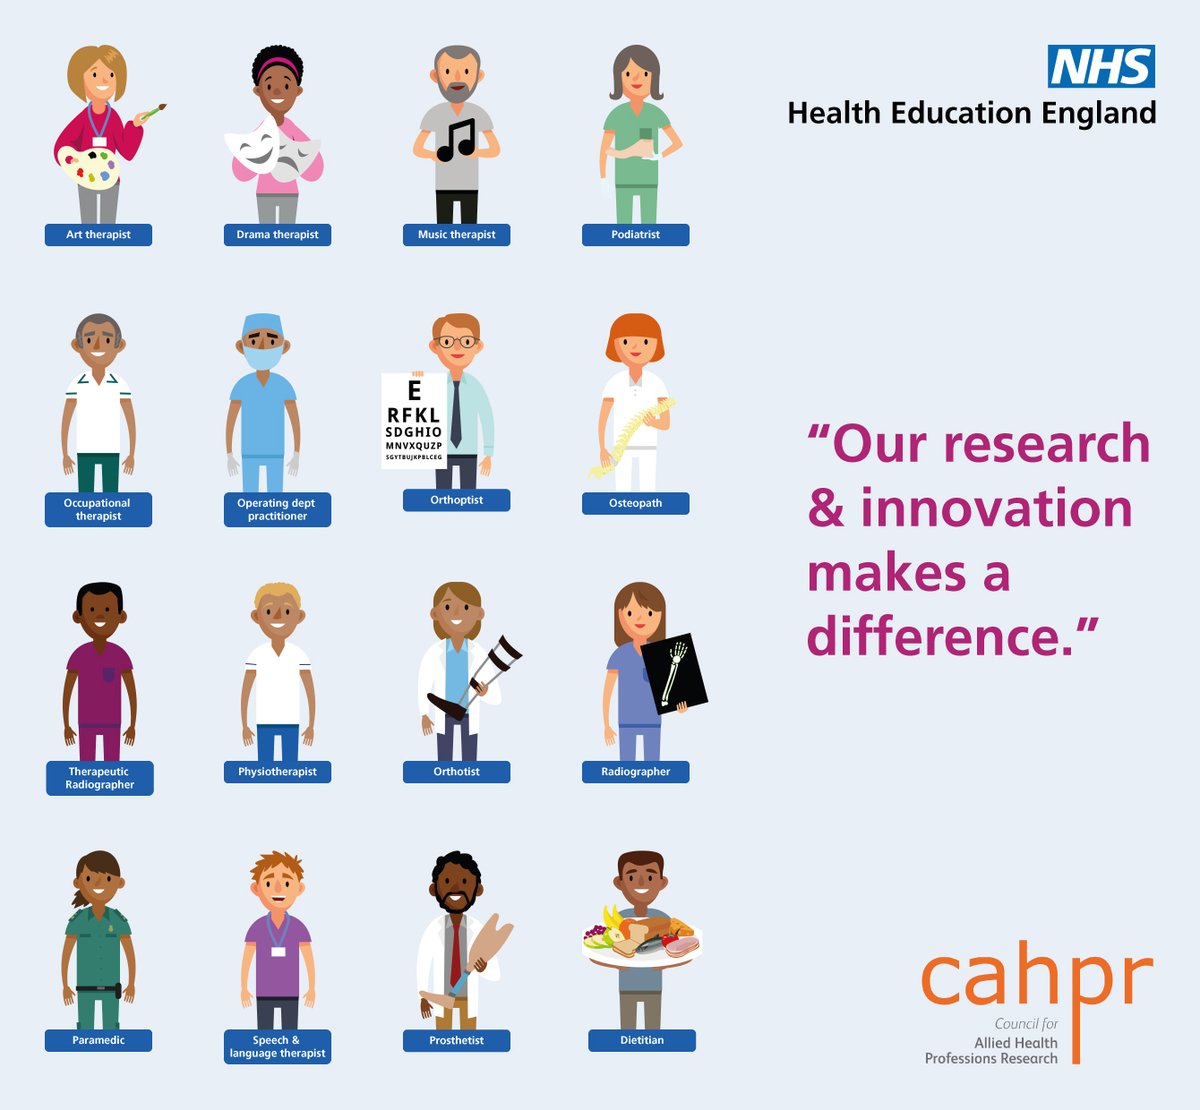 The AHP Research and Innovation Strategy is one year old on 25/1/23. To celebrate, @NHS_HealthEdEng & @thecsp are hosting a free online event with important news, updates and announcements about exciting developments since its launch: cahpr.csp.org.uk/news/2022-10-2…